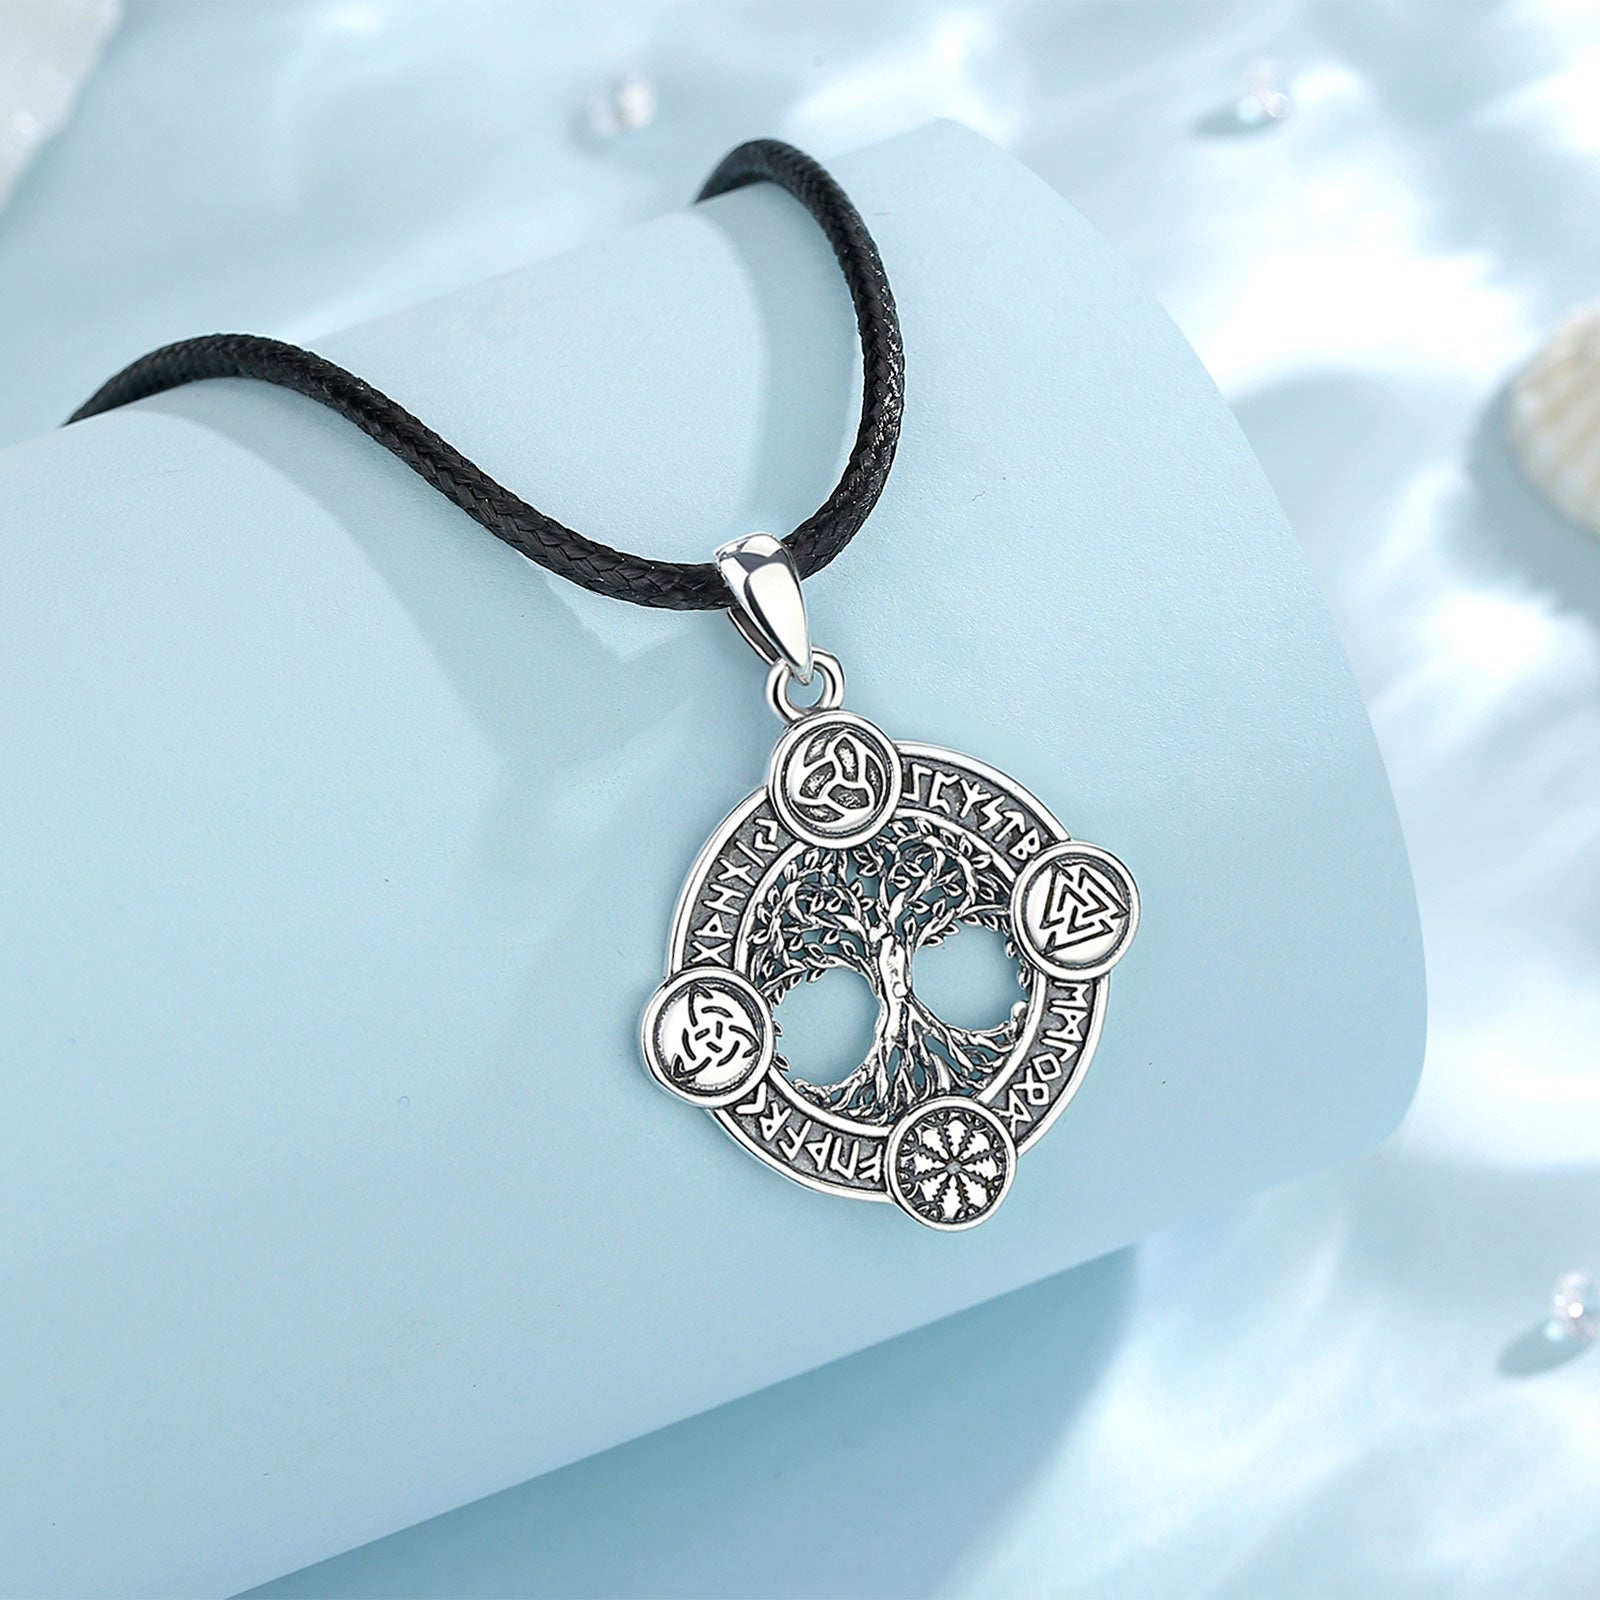 Yggdrasil, The Tree of Life With Runes Necklace in 925 Sterling Silver